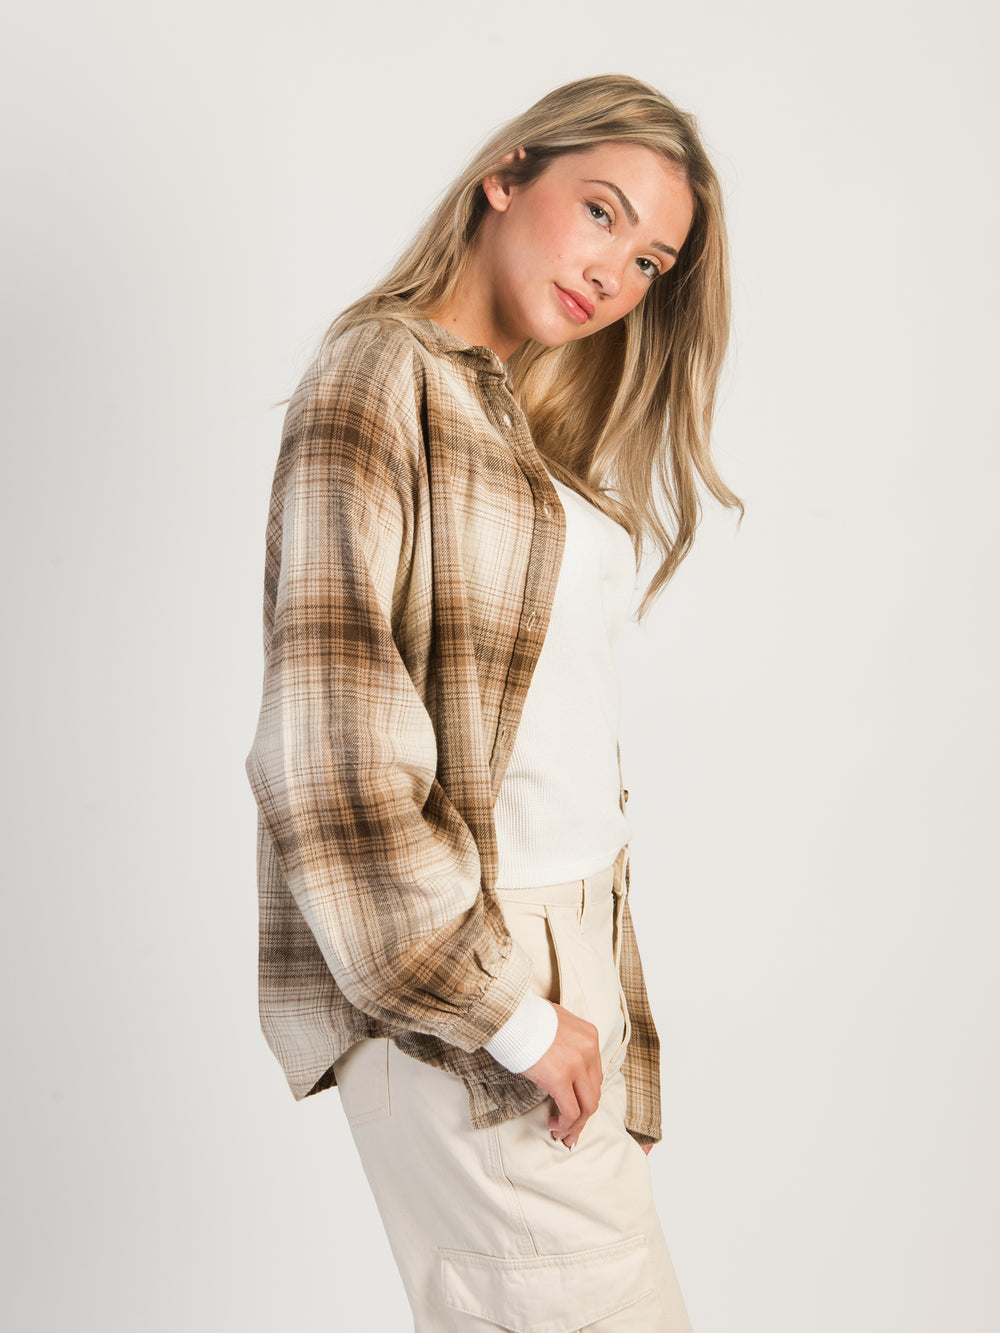 HARLOW KENDALL OVERSIZED FLANNEL - BROWN